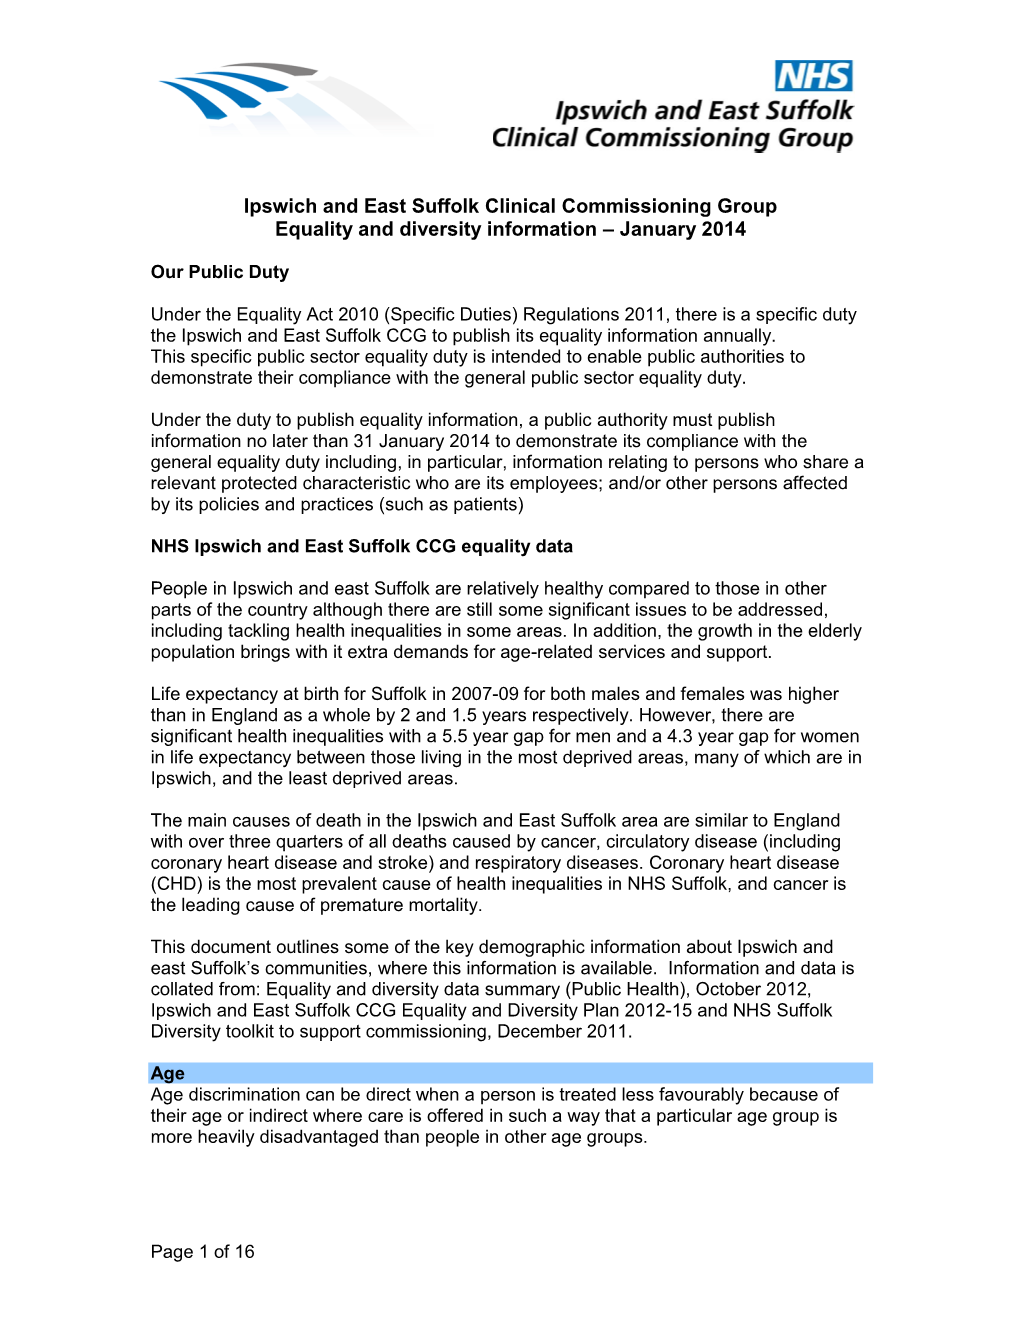 Ipswich and East Suffolk Clinical Commissioning Group Equality and Diversity Information – January 2014